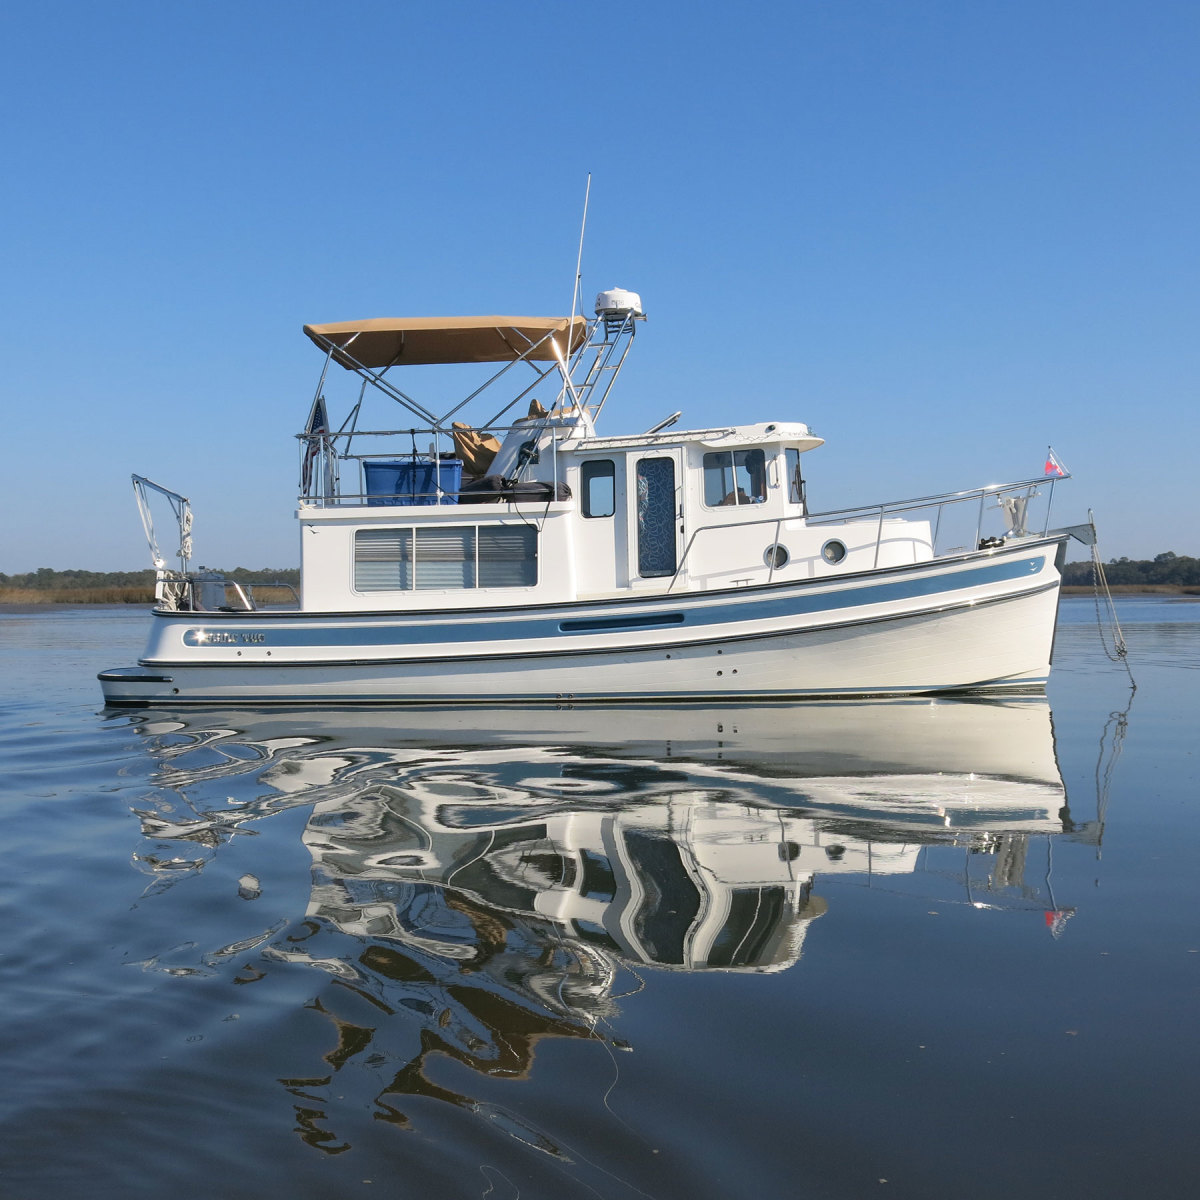 LOA 34’11”  Beam 11’4”  Draft 3’8”  Displacement 15,700 lbs.  Speed 12 to 14 knots   Brokerage price $249,900 to $379,900